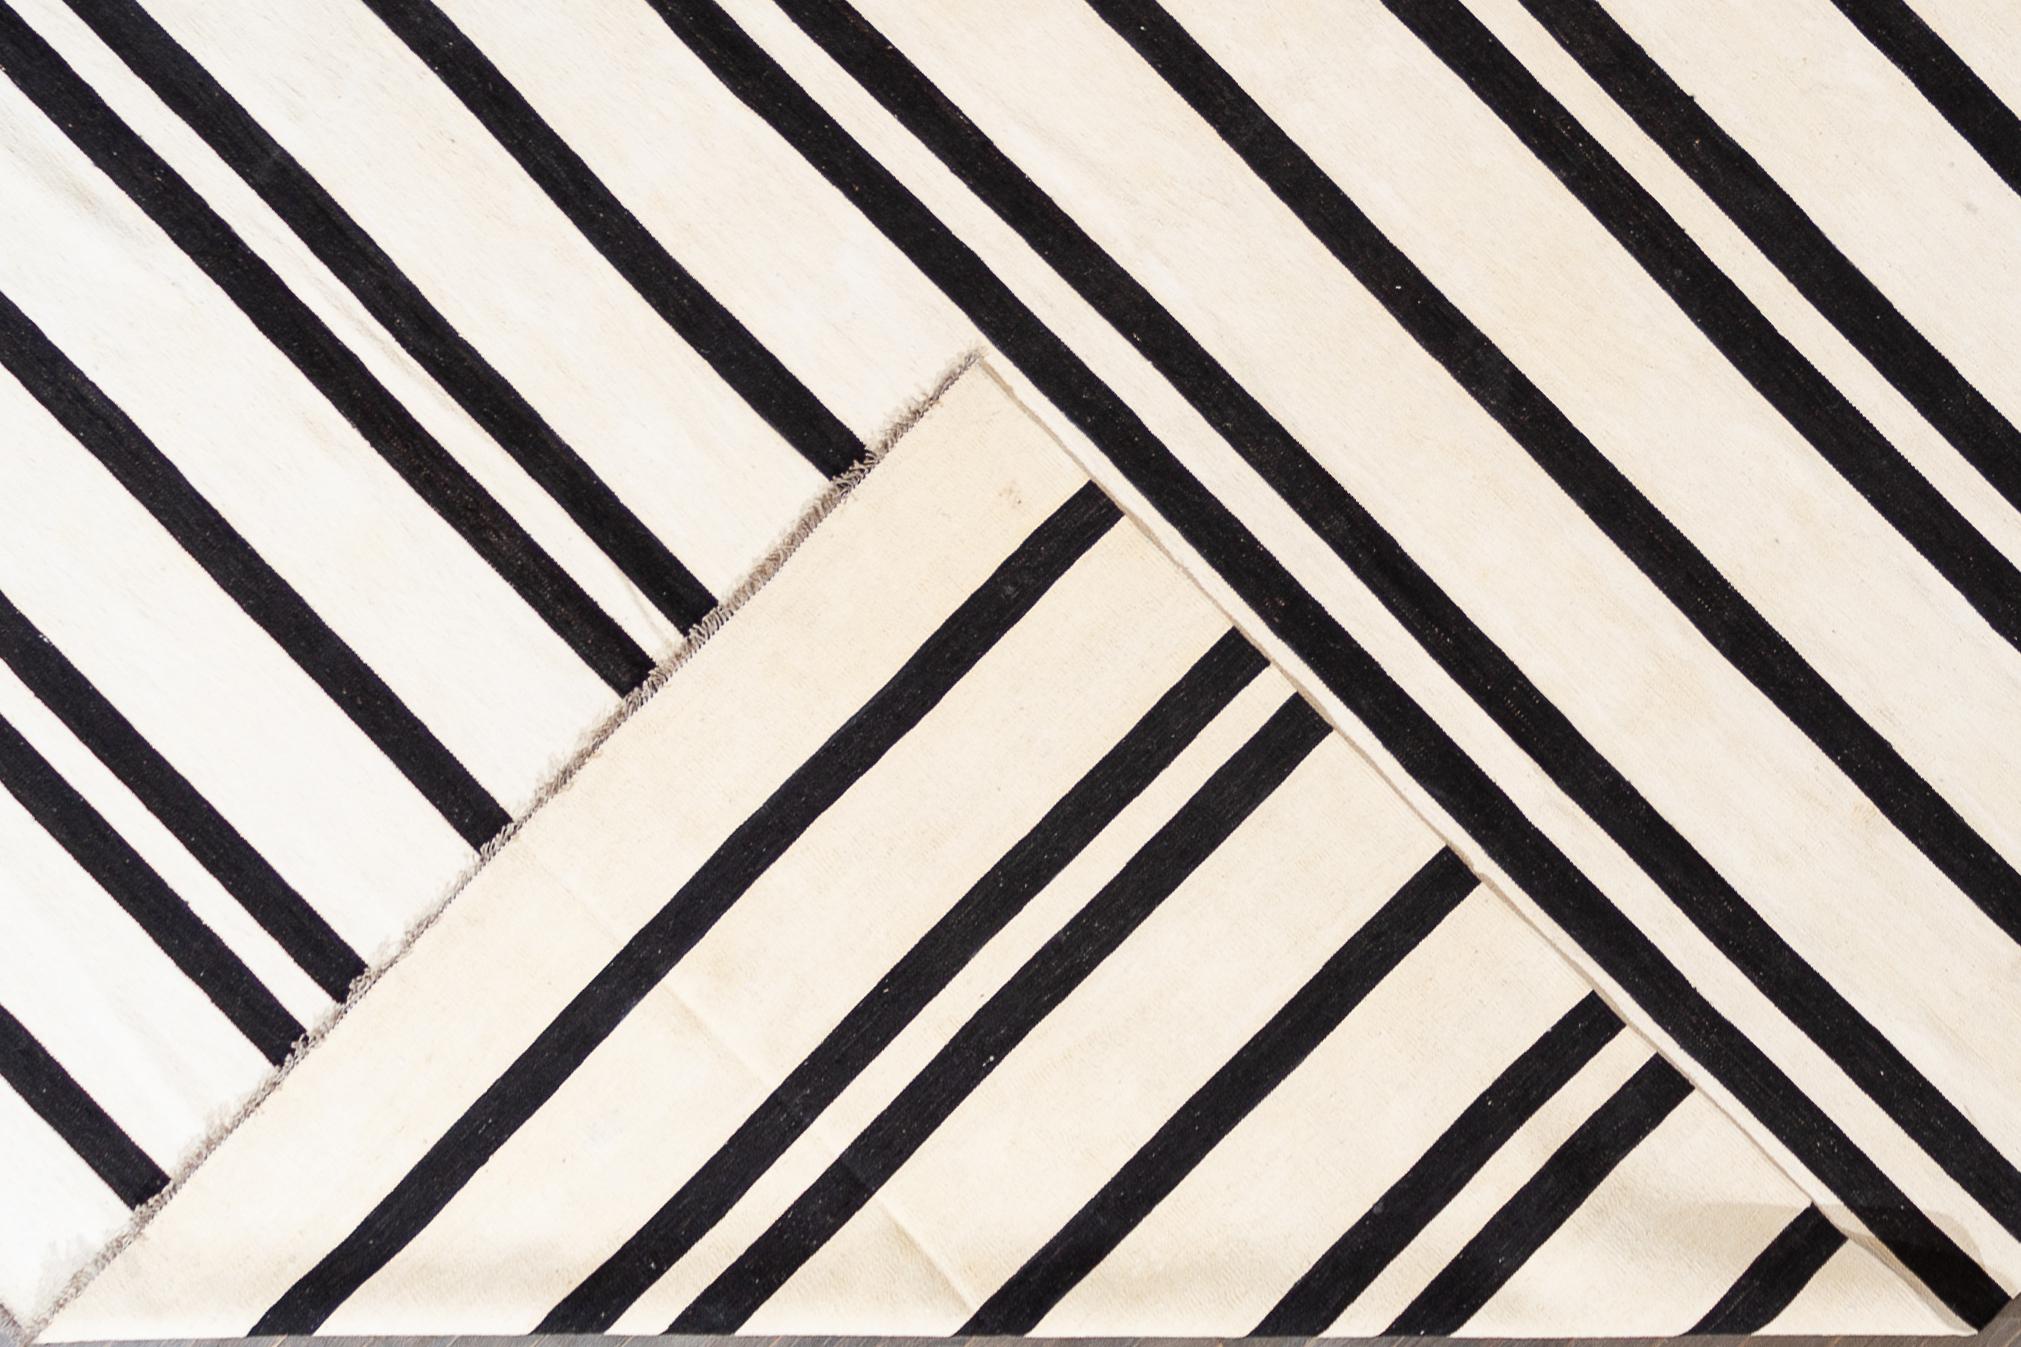 Beautiful 21st century contemporary Kilim rug, handwoven wool in an all-over black and white striped design.
This rug measures 12' 0